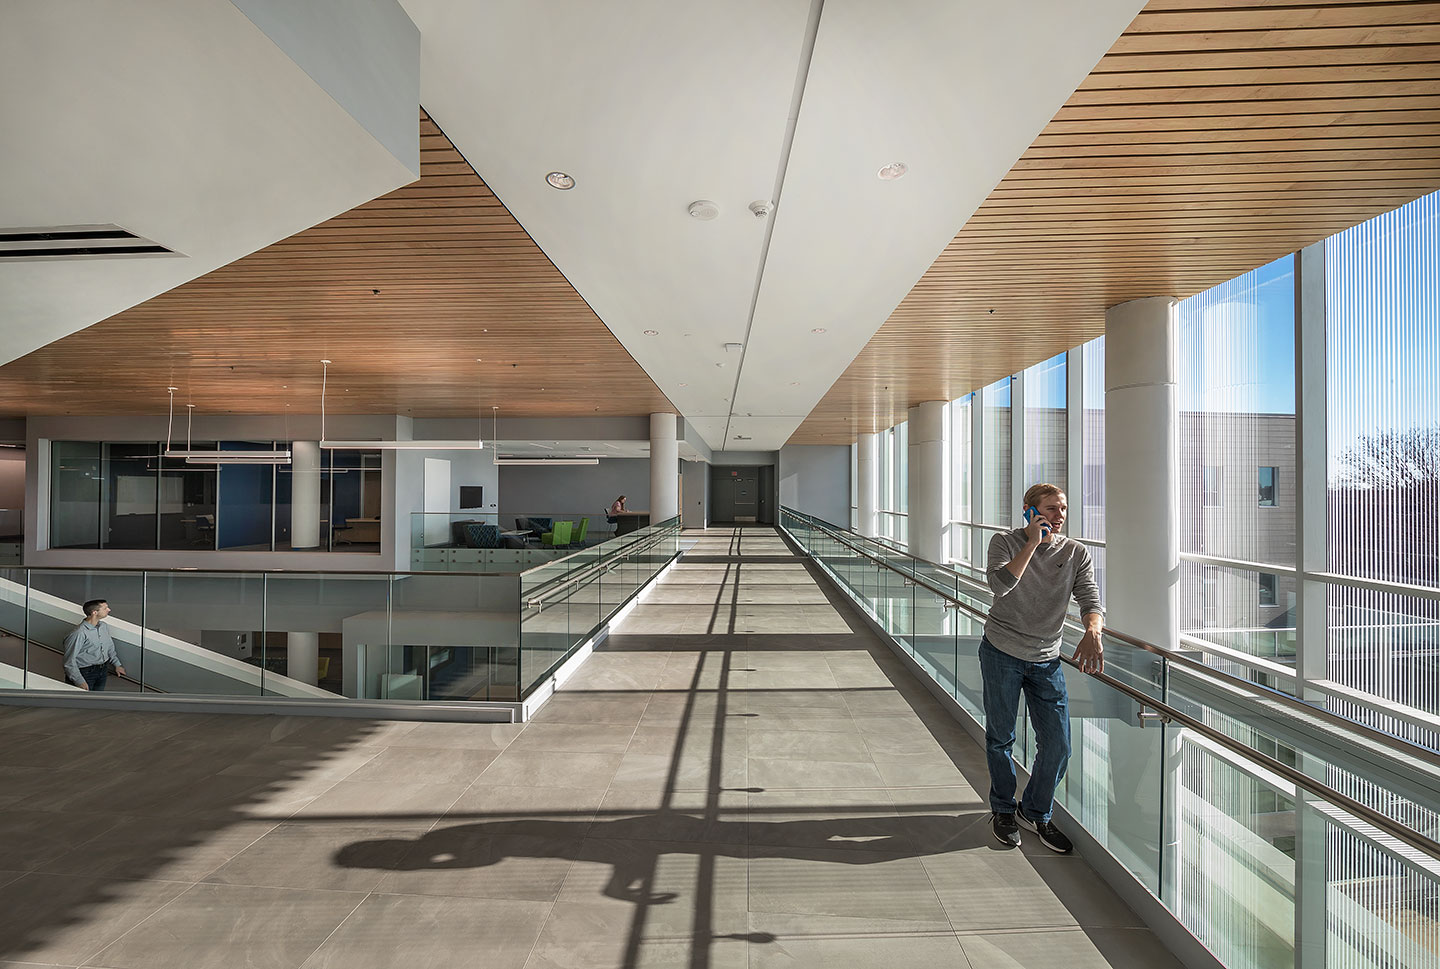 The building’s interior soaks in natural daylight through its transparent south façade and sun control systems. A 3D sun diagram helps the owner identify various strategies for solar control on the west, south, and east sides.